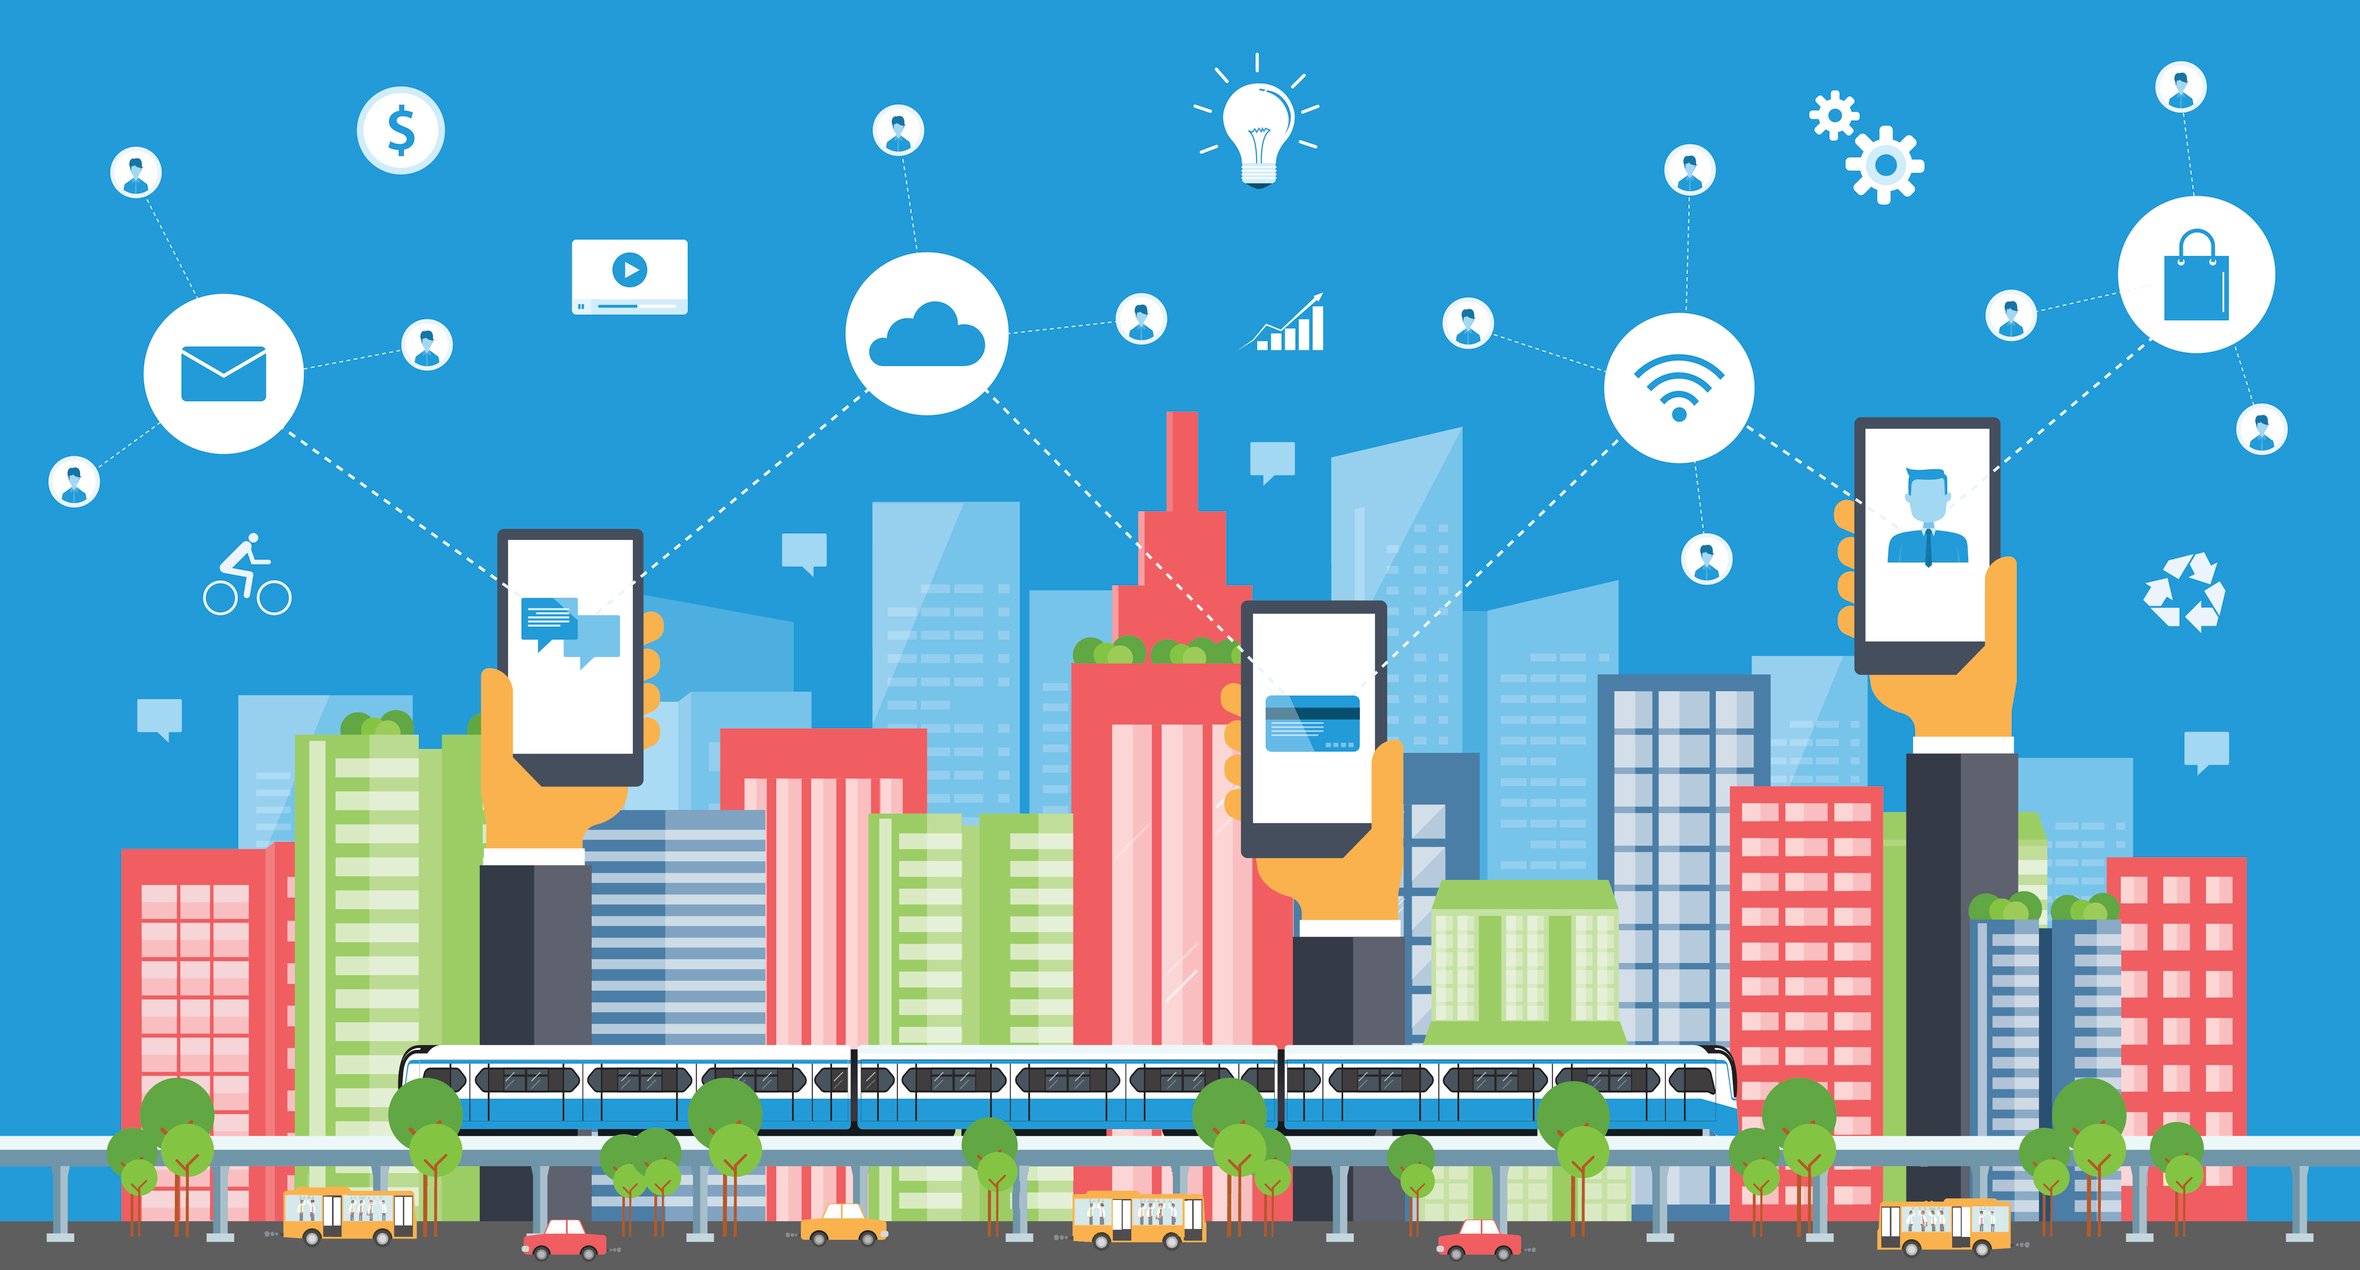 The connectivity of a smart city